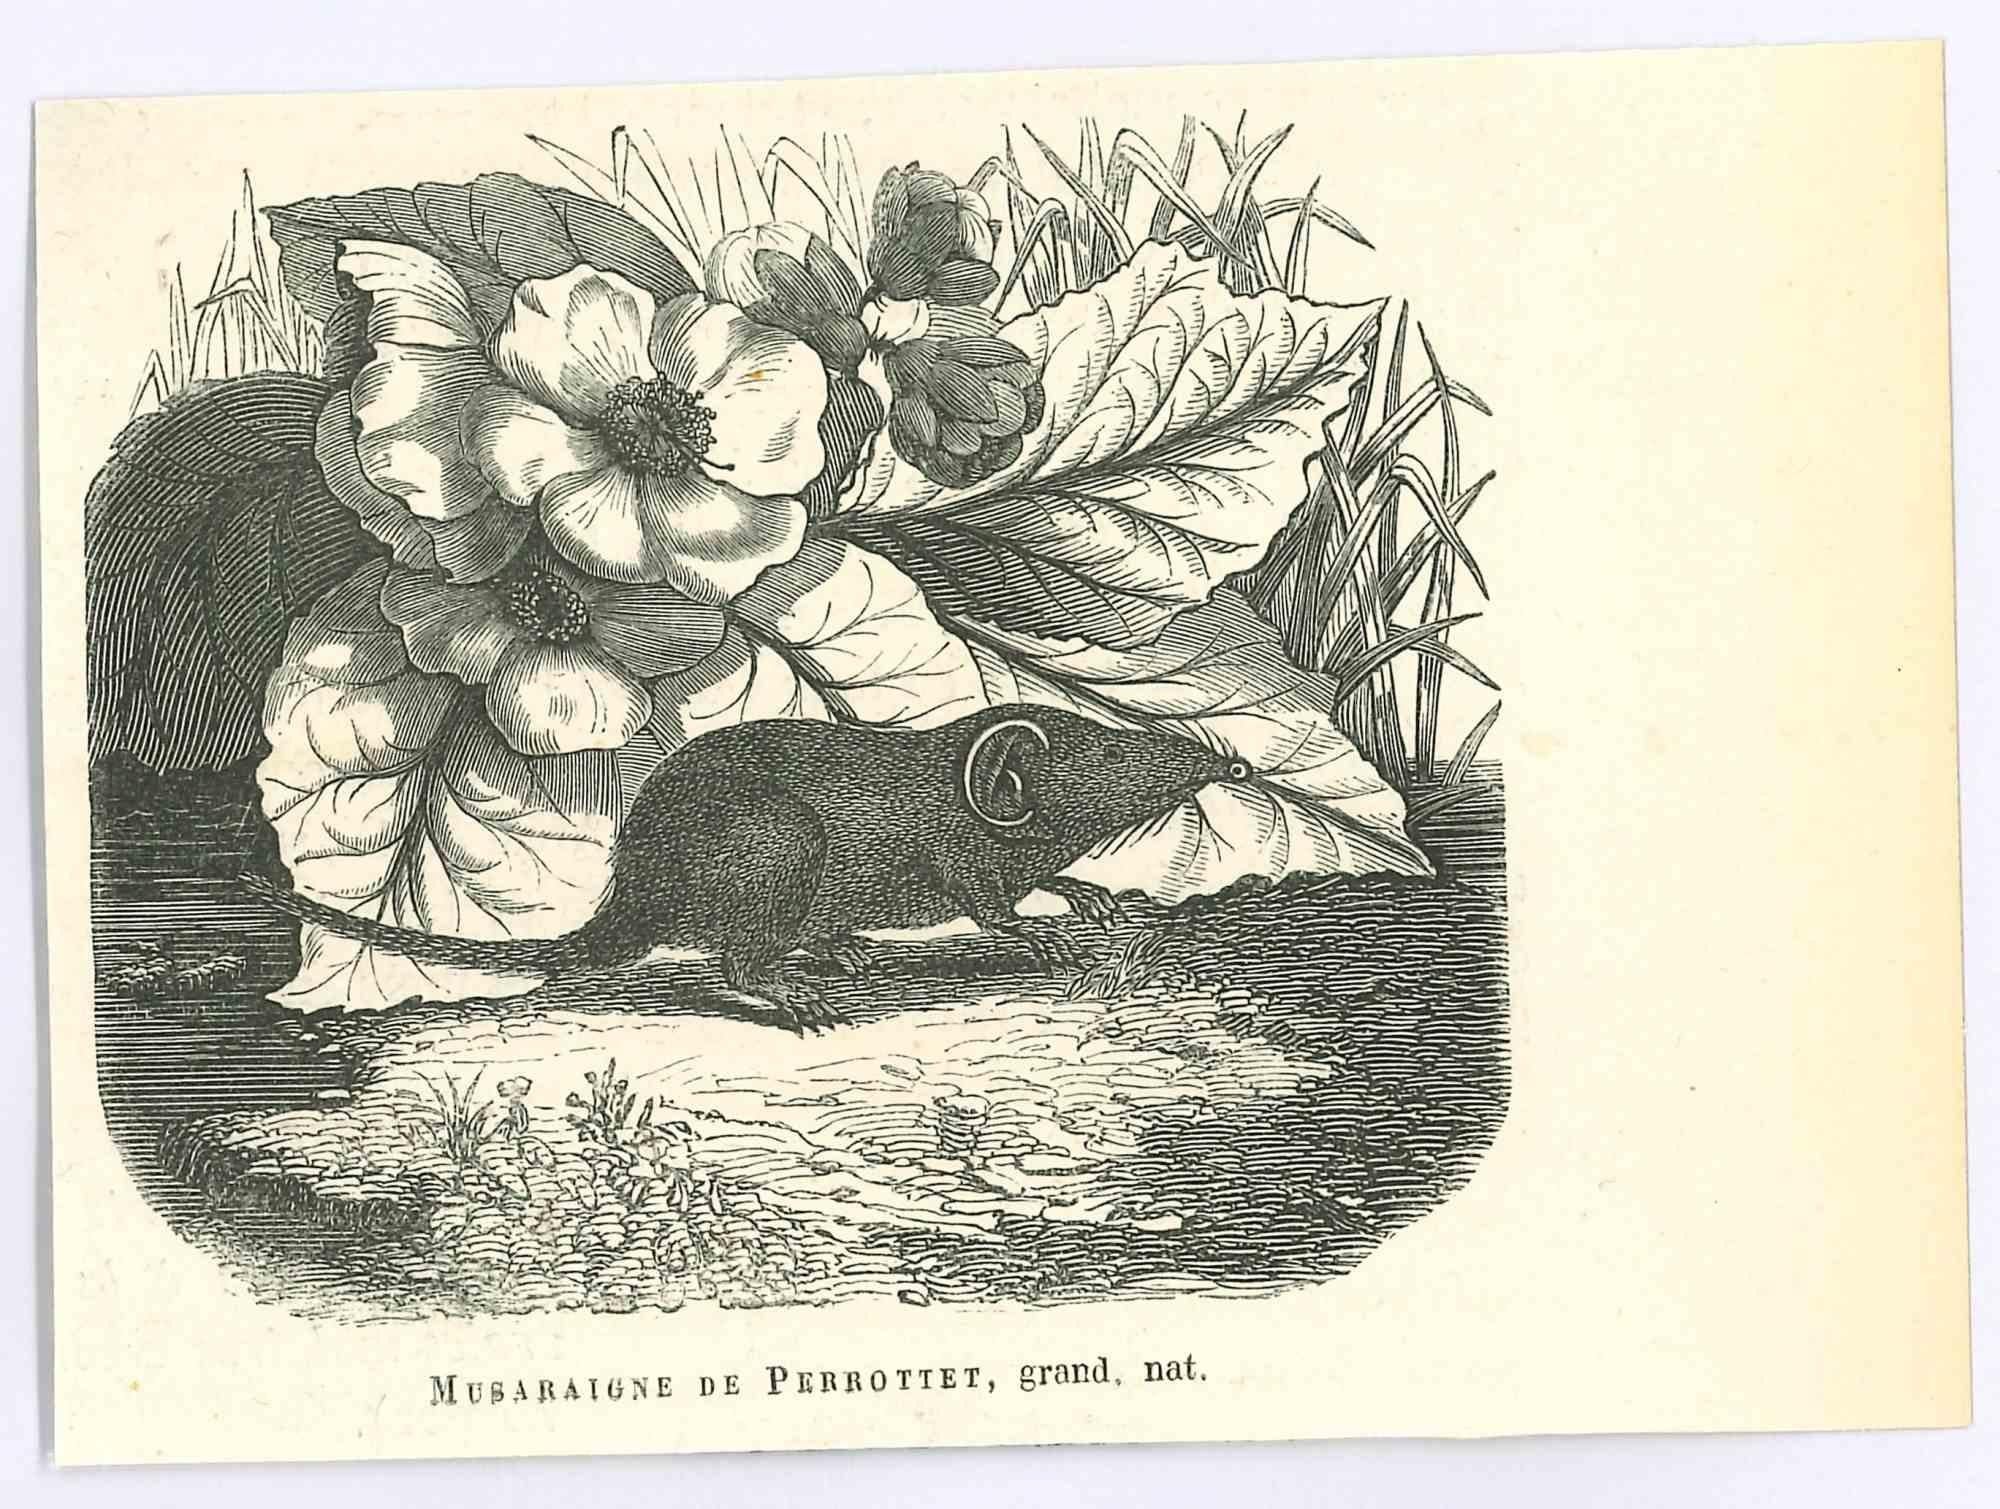 The Mouse - Original Lithograph by Paul Gervais - 1854